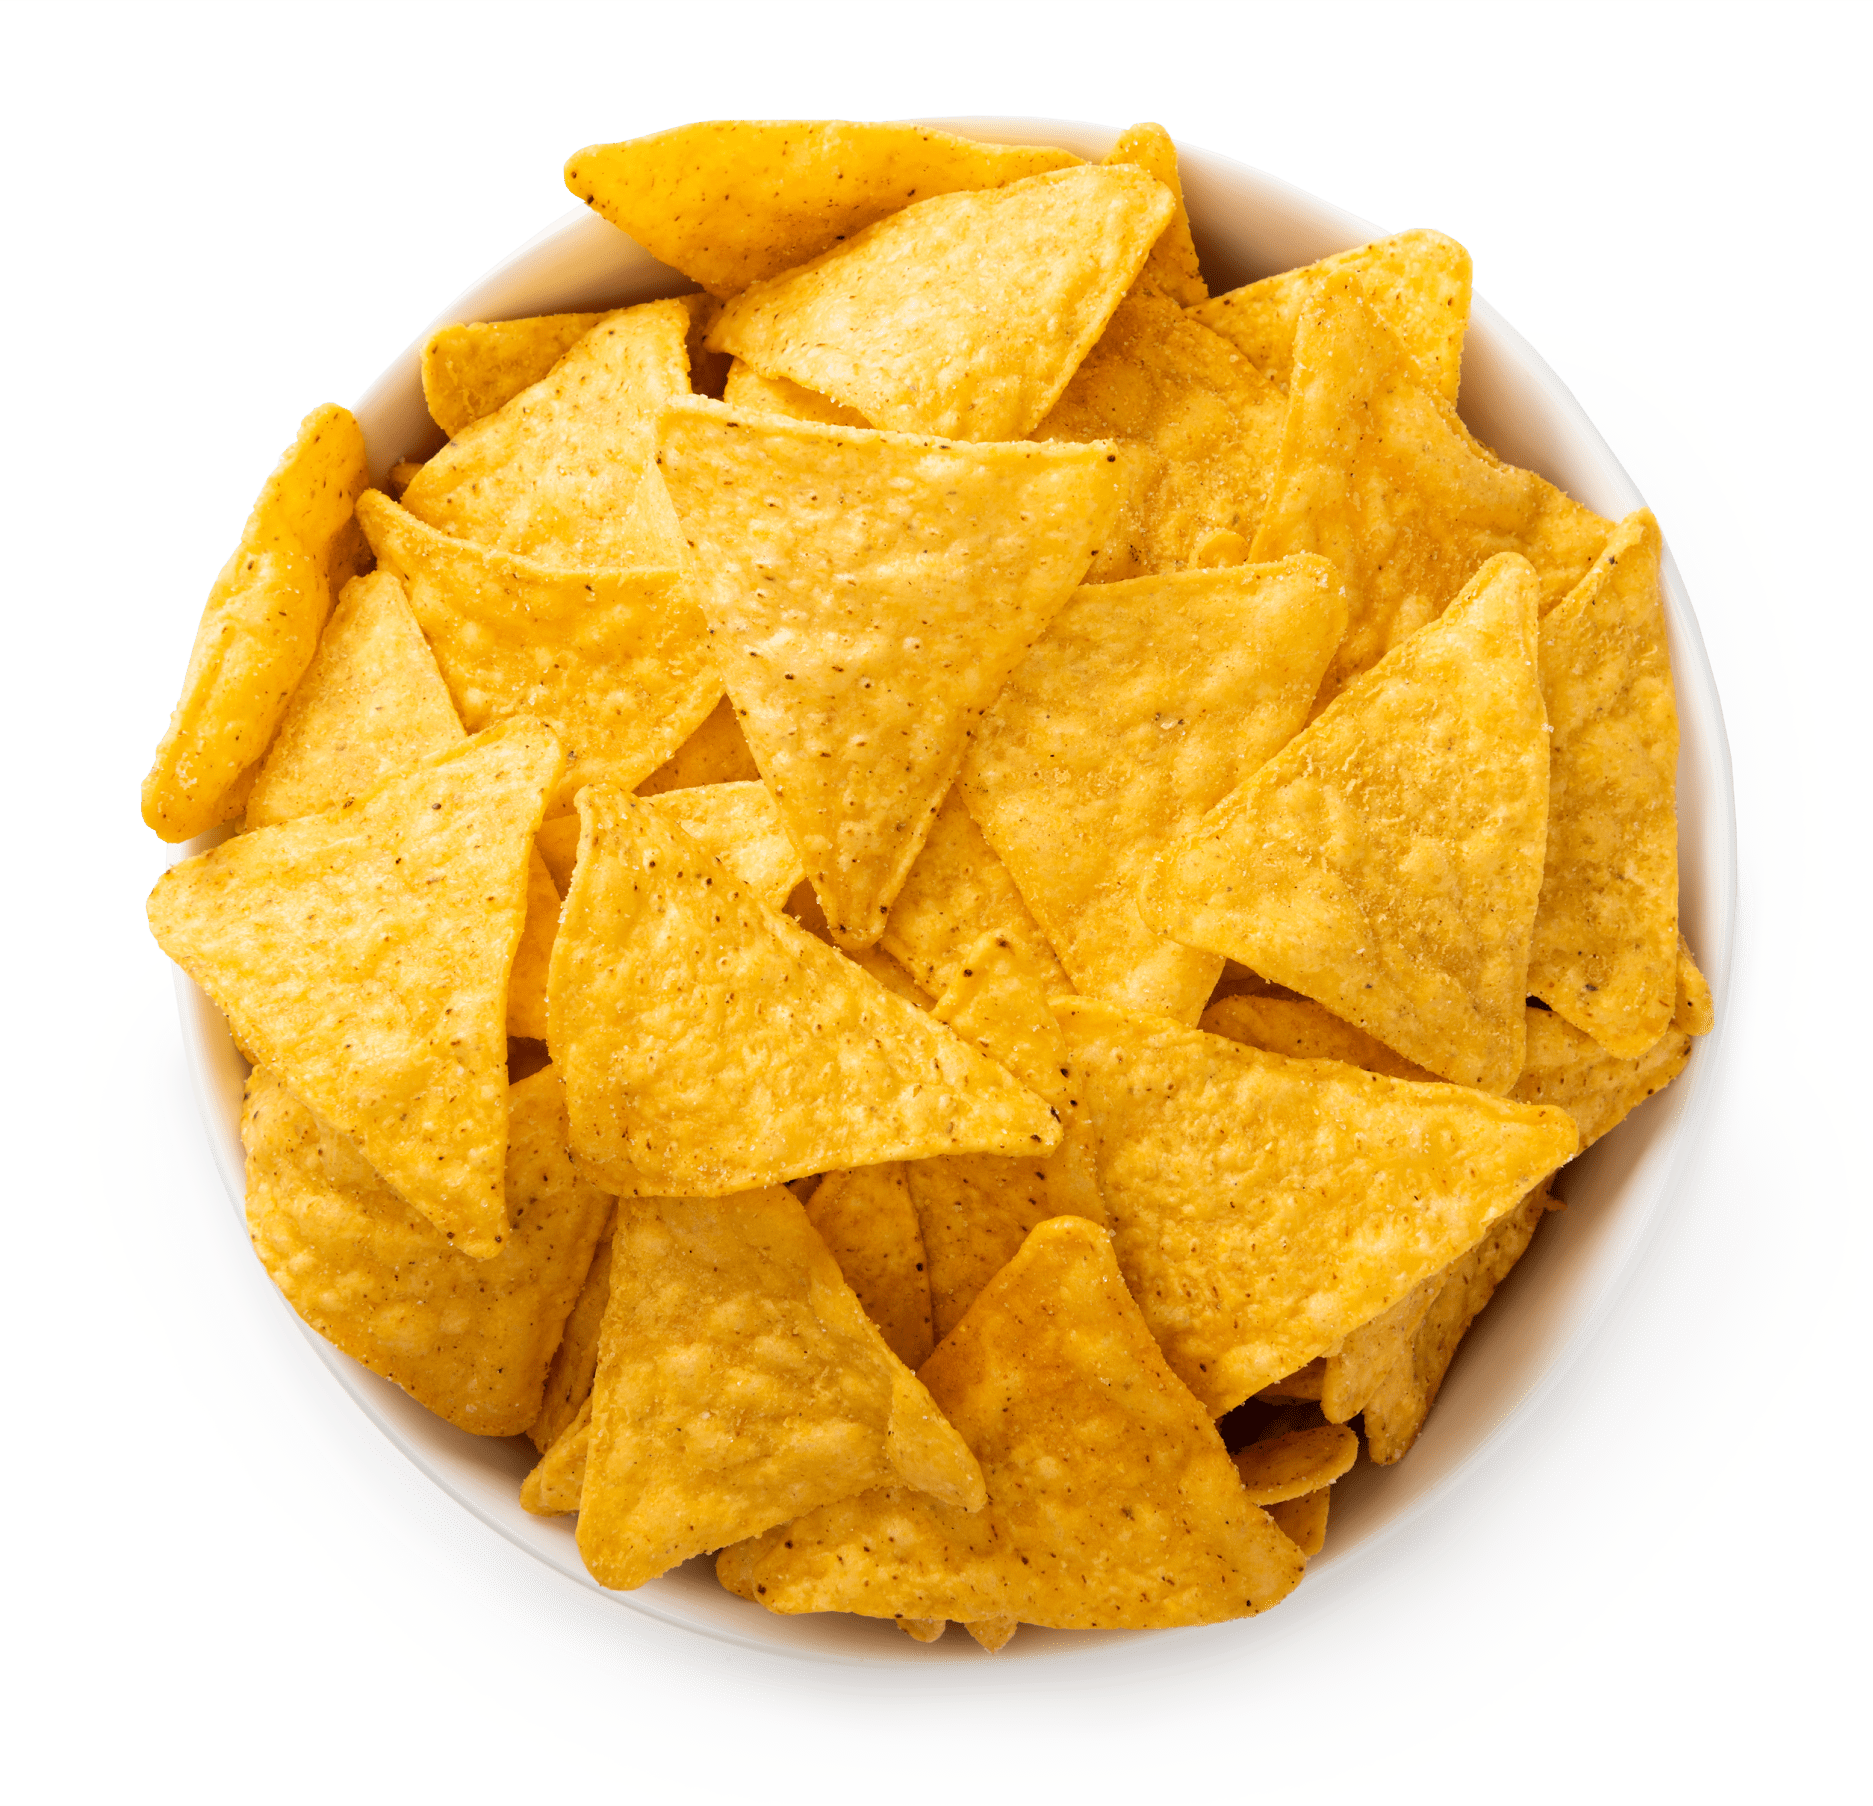 Image of pub style chips in a bowl